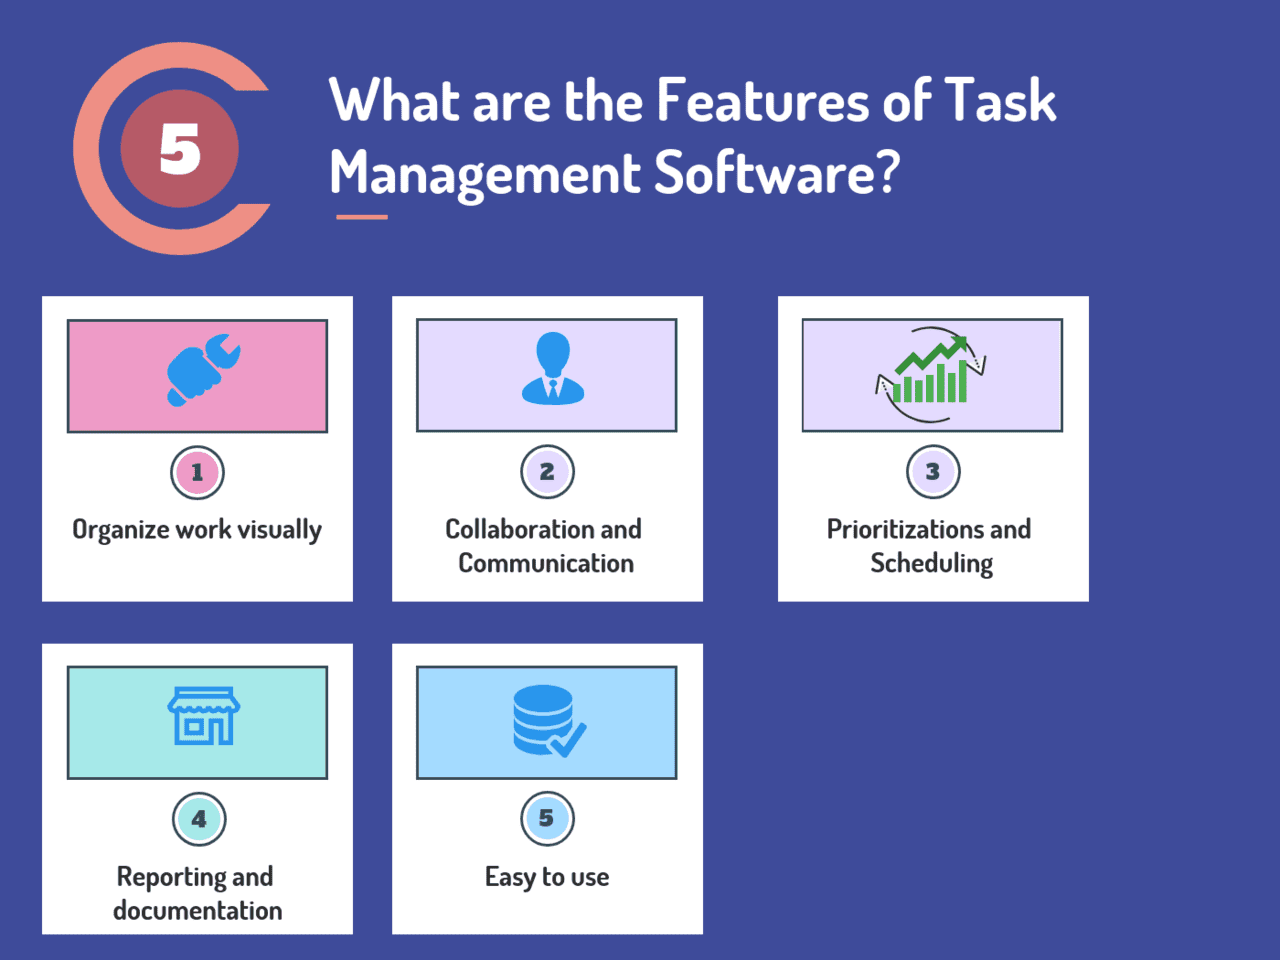 What are the Features of Task Management Software?